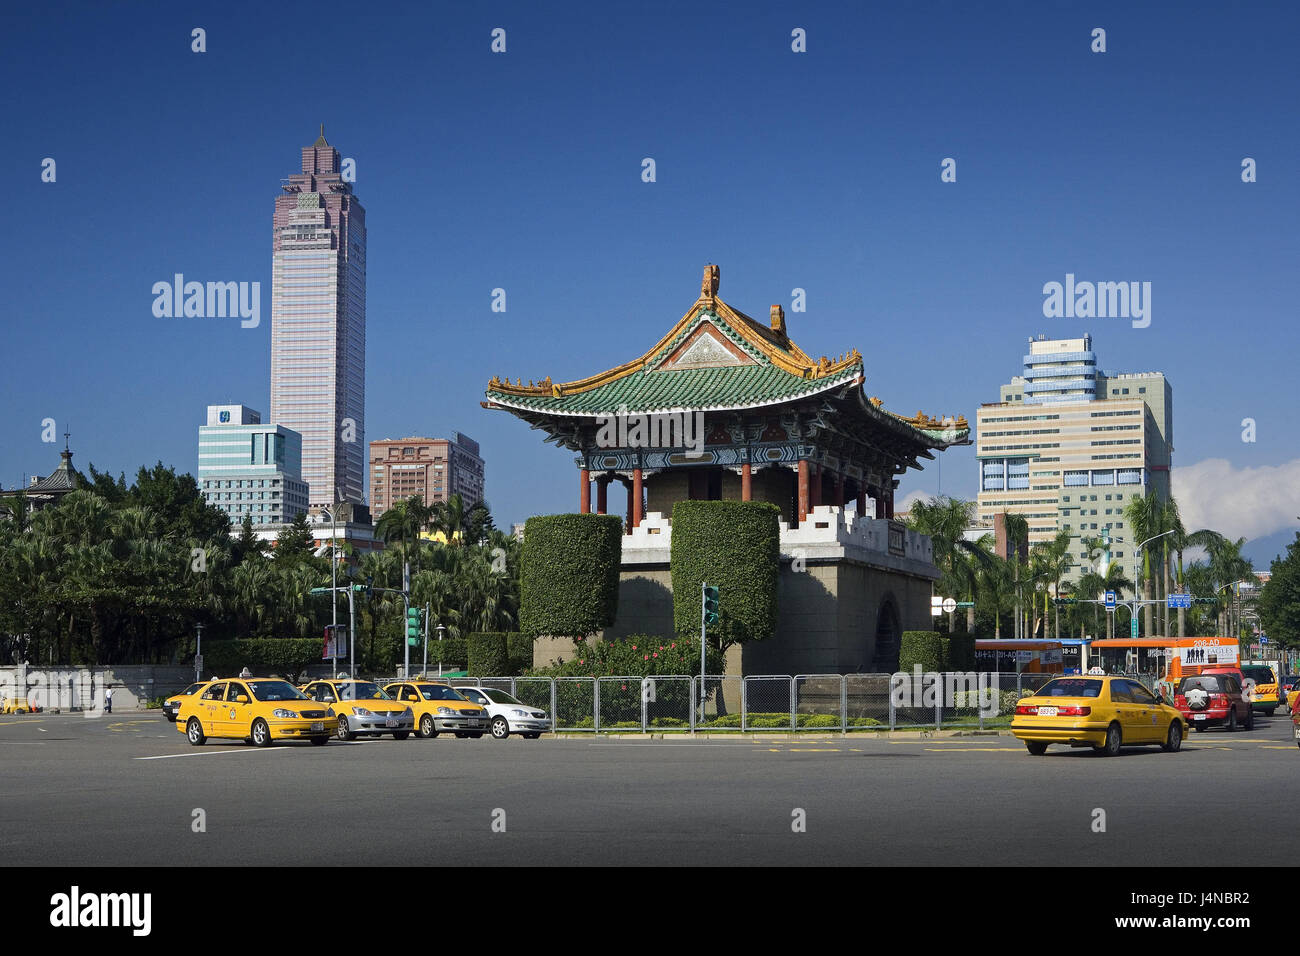 Taiwan, Taipeh, Zhongcheng gate, street, traffic, Asia, Eastern Asia, town, capital, building, structures, architecture, Stock Photo